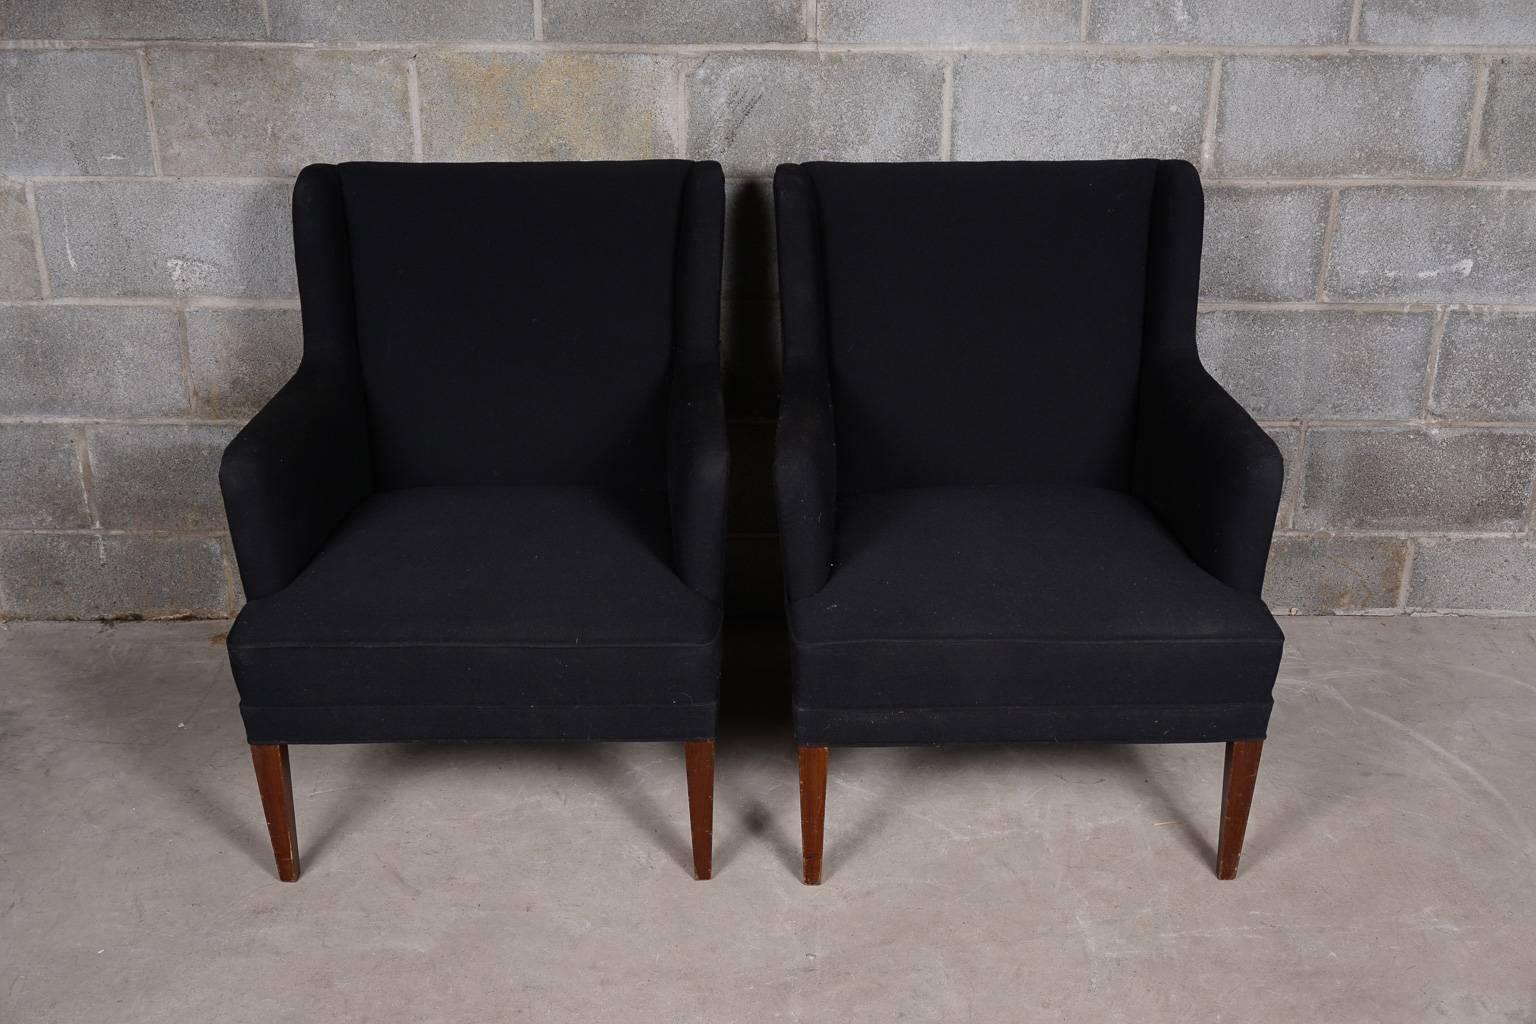 Pair of Frits Henningsen chairs upholstered in black fabric. Tapered stained beech legs. Very good quality and design.